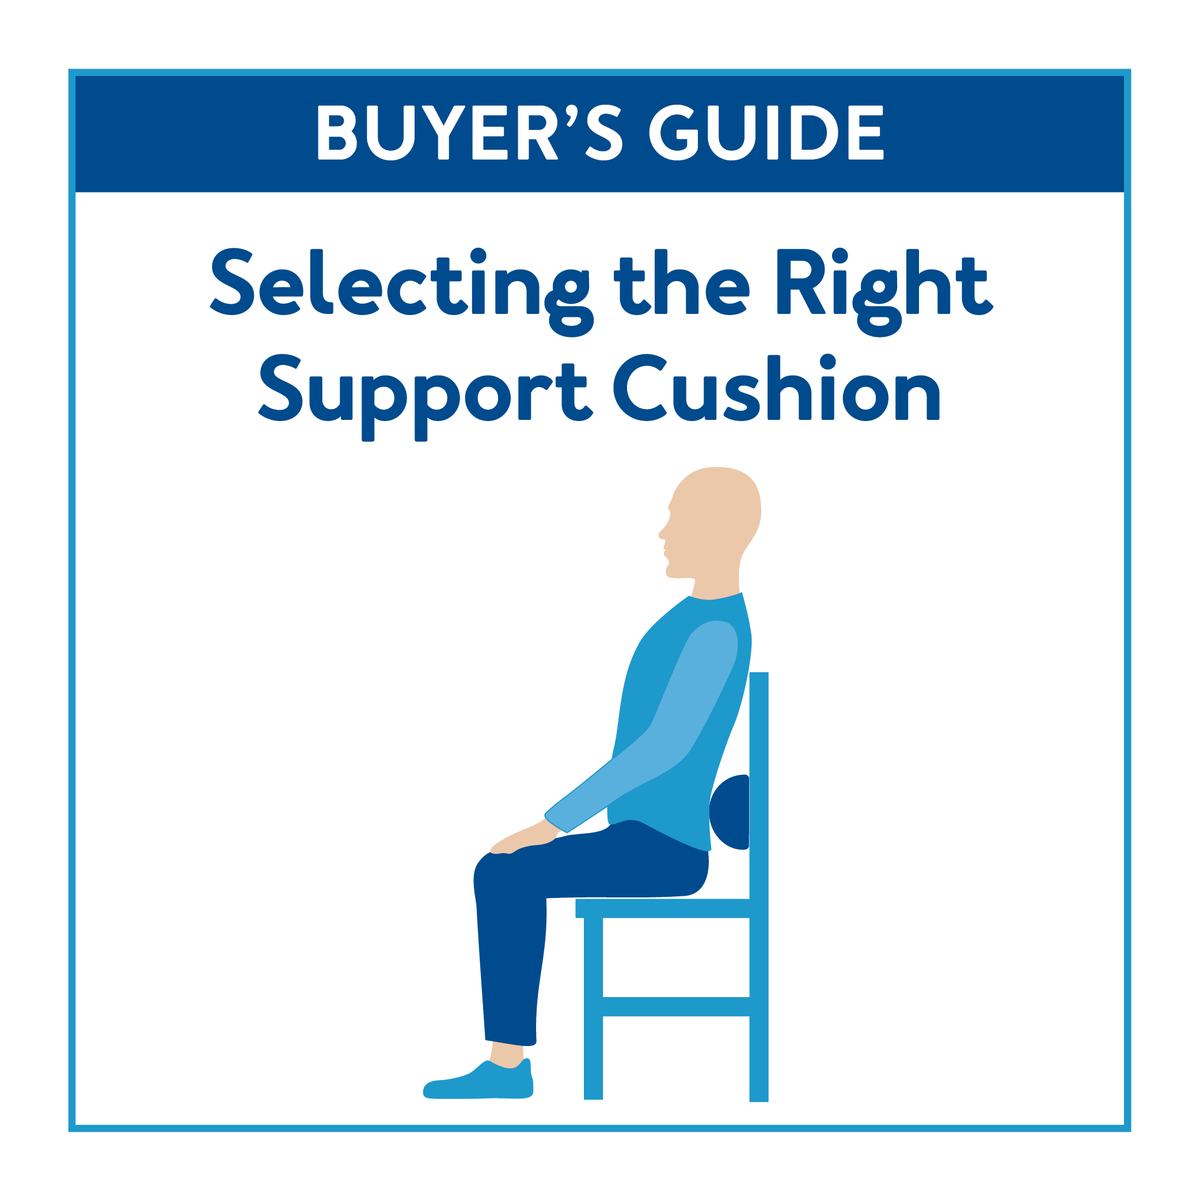 A graphic of a person sitting on a support cushion. Text, buyer’s guide: selecting the right support cushion